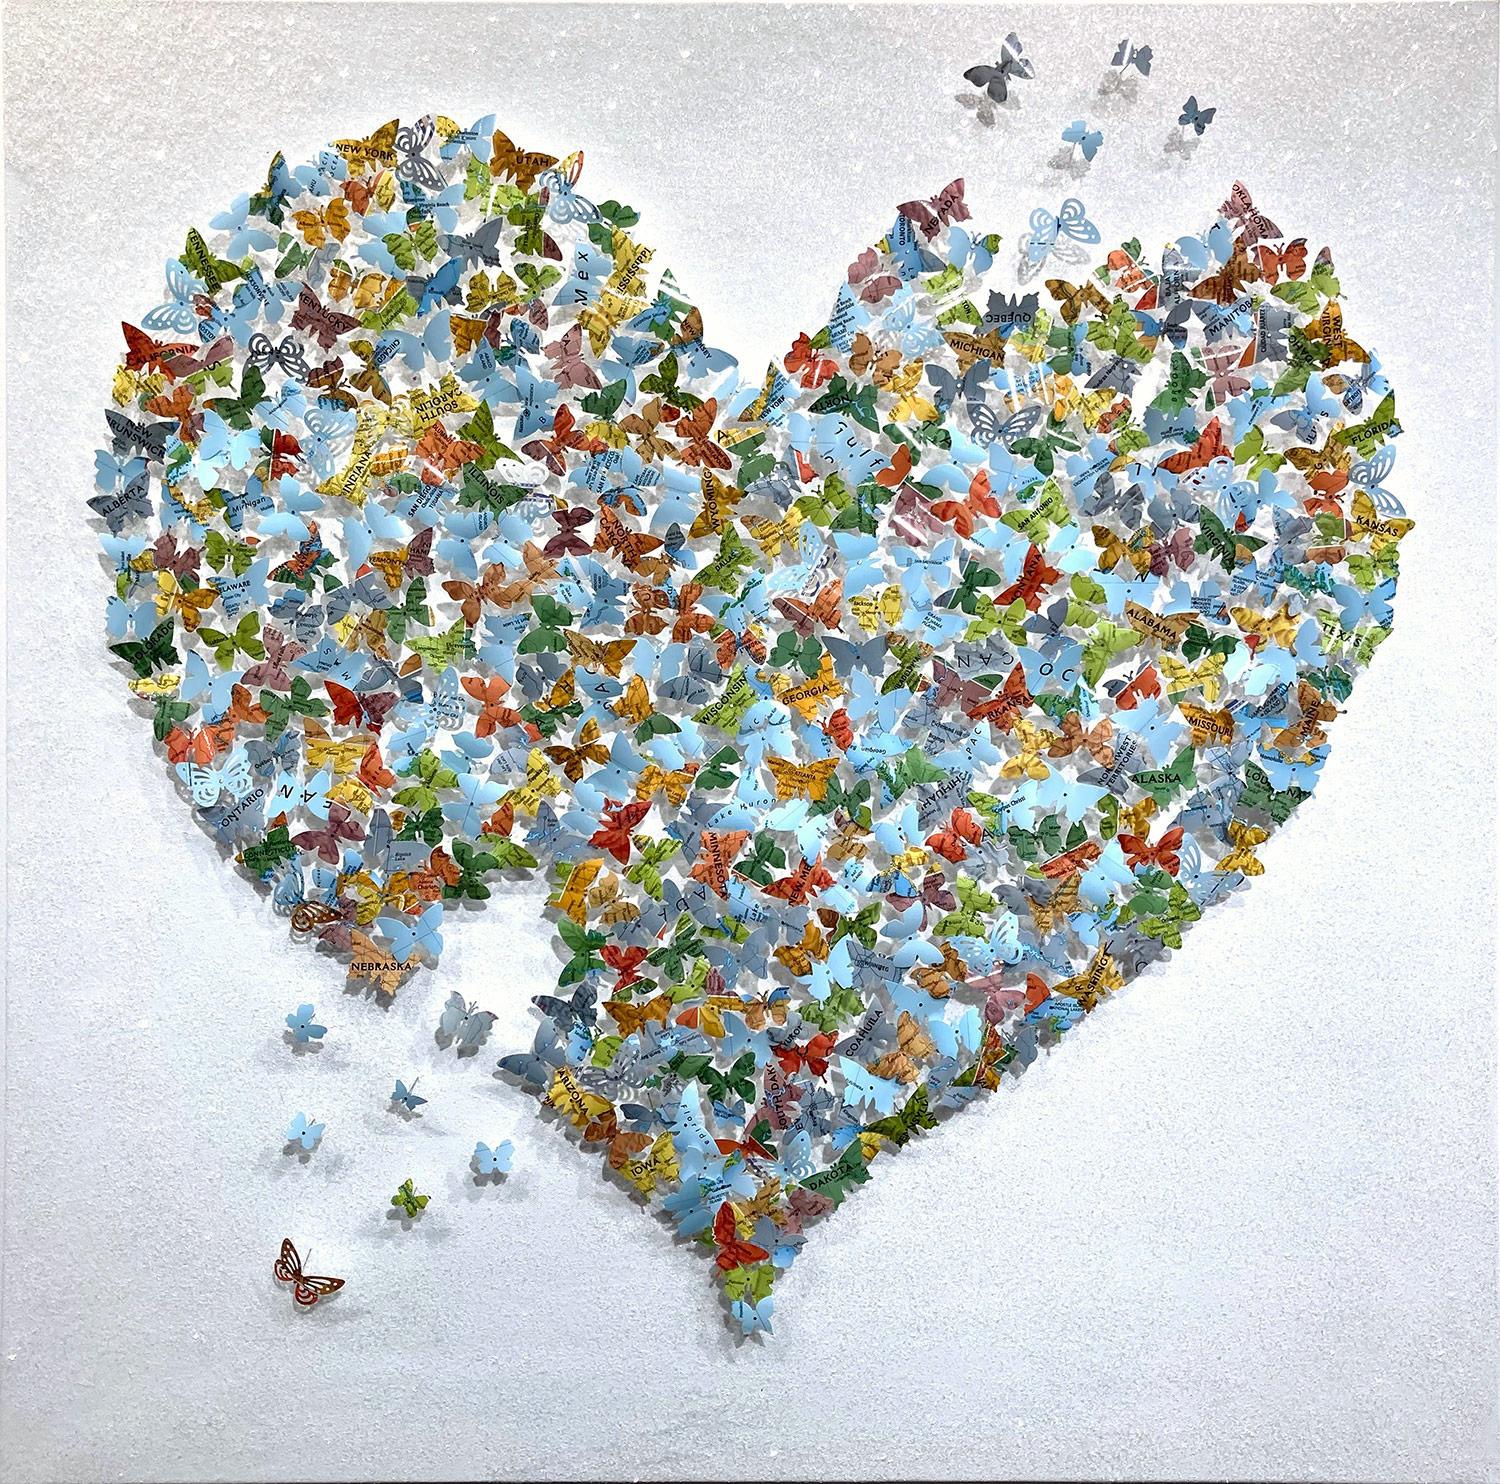 Laila Jalallar Animal Painting - "Come Together - Multi Color Heart" Paper Maps Butterflies Painting on Canvas